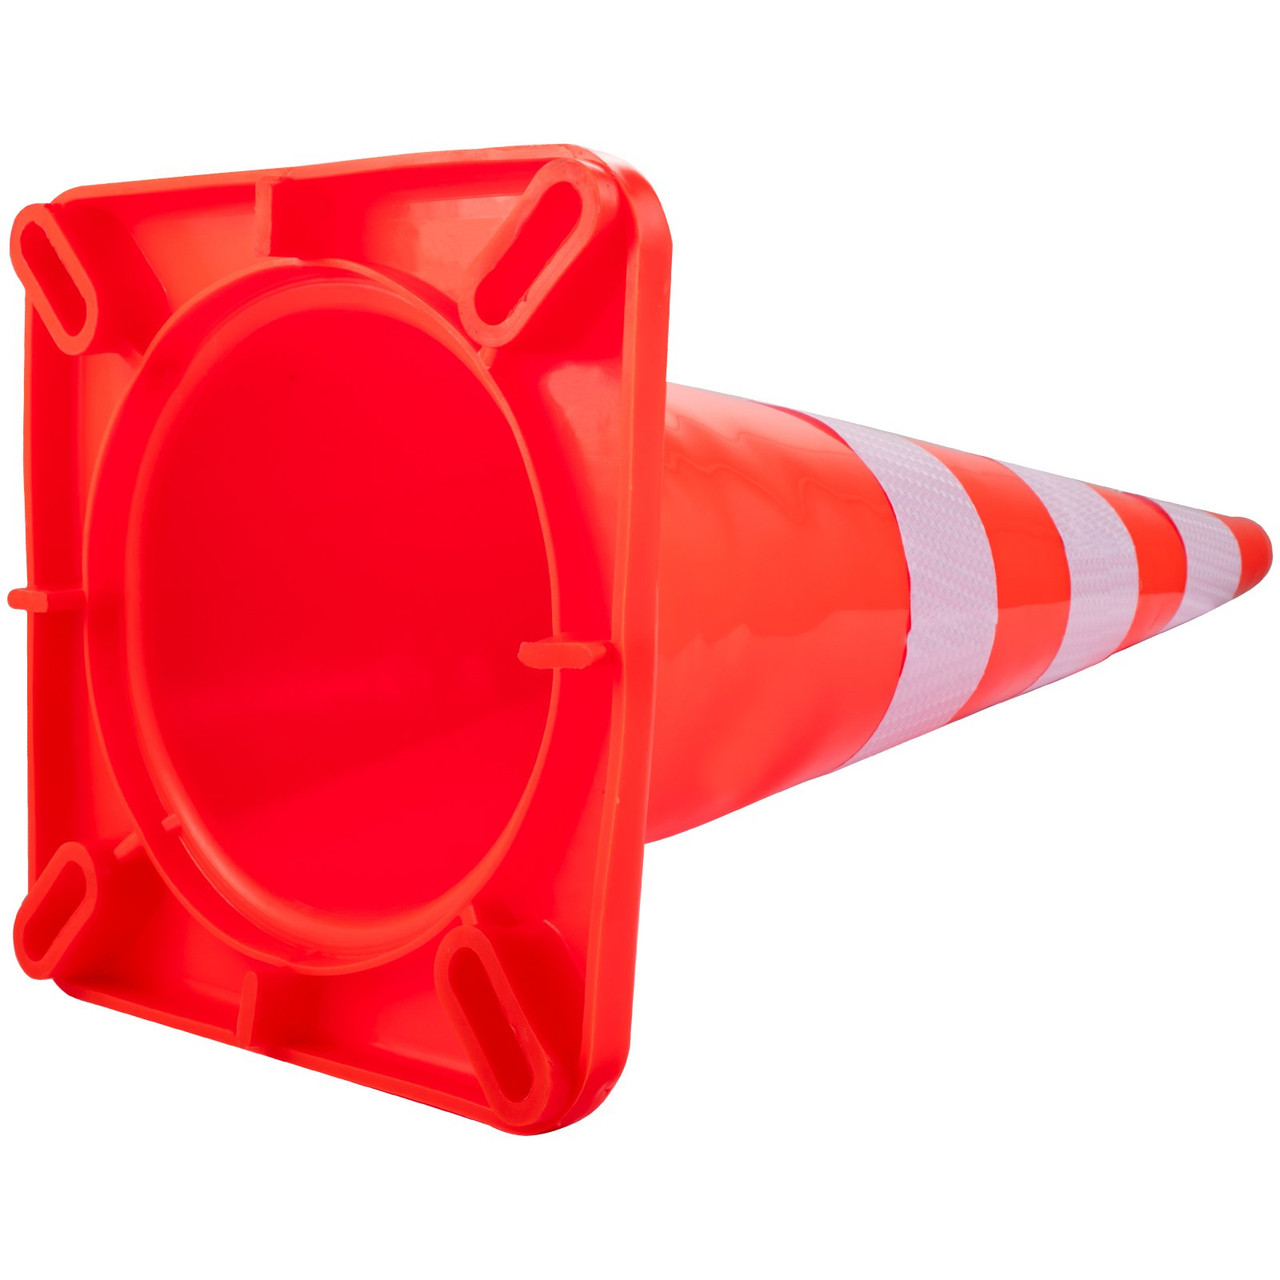 Safety Cones, 6 x 36" Traffic Cones, PVC Orange Construction Cones, Reflective Collars Traffic Cones with Weighted Base Used for Traffic Control, Driveway Road Parking and School Improvement